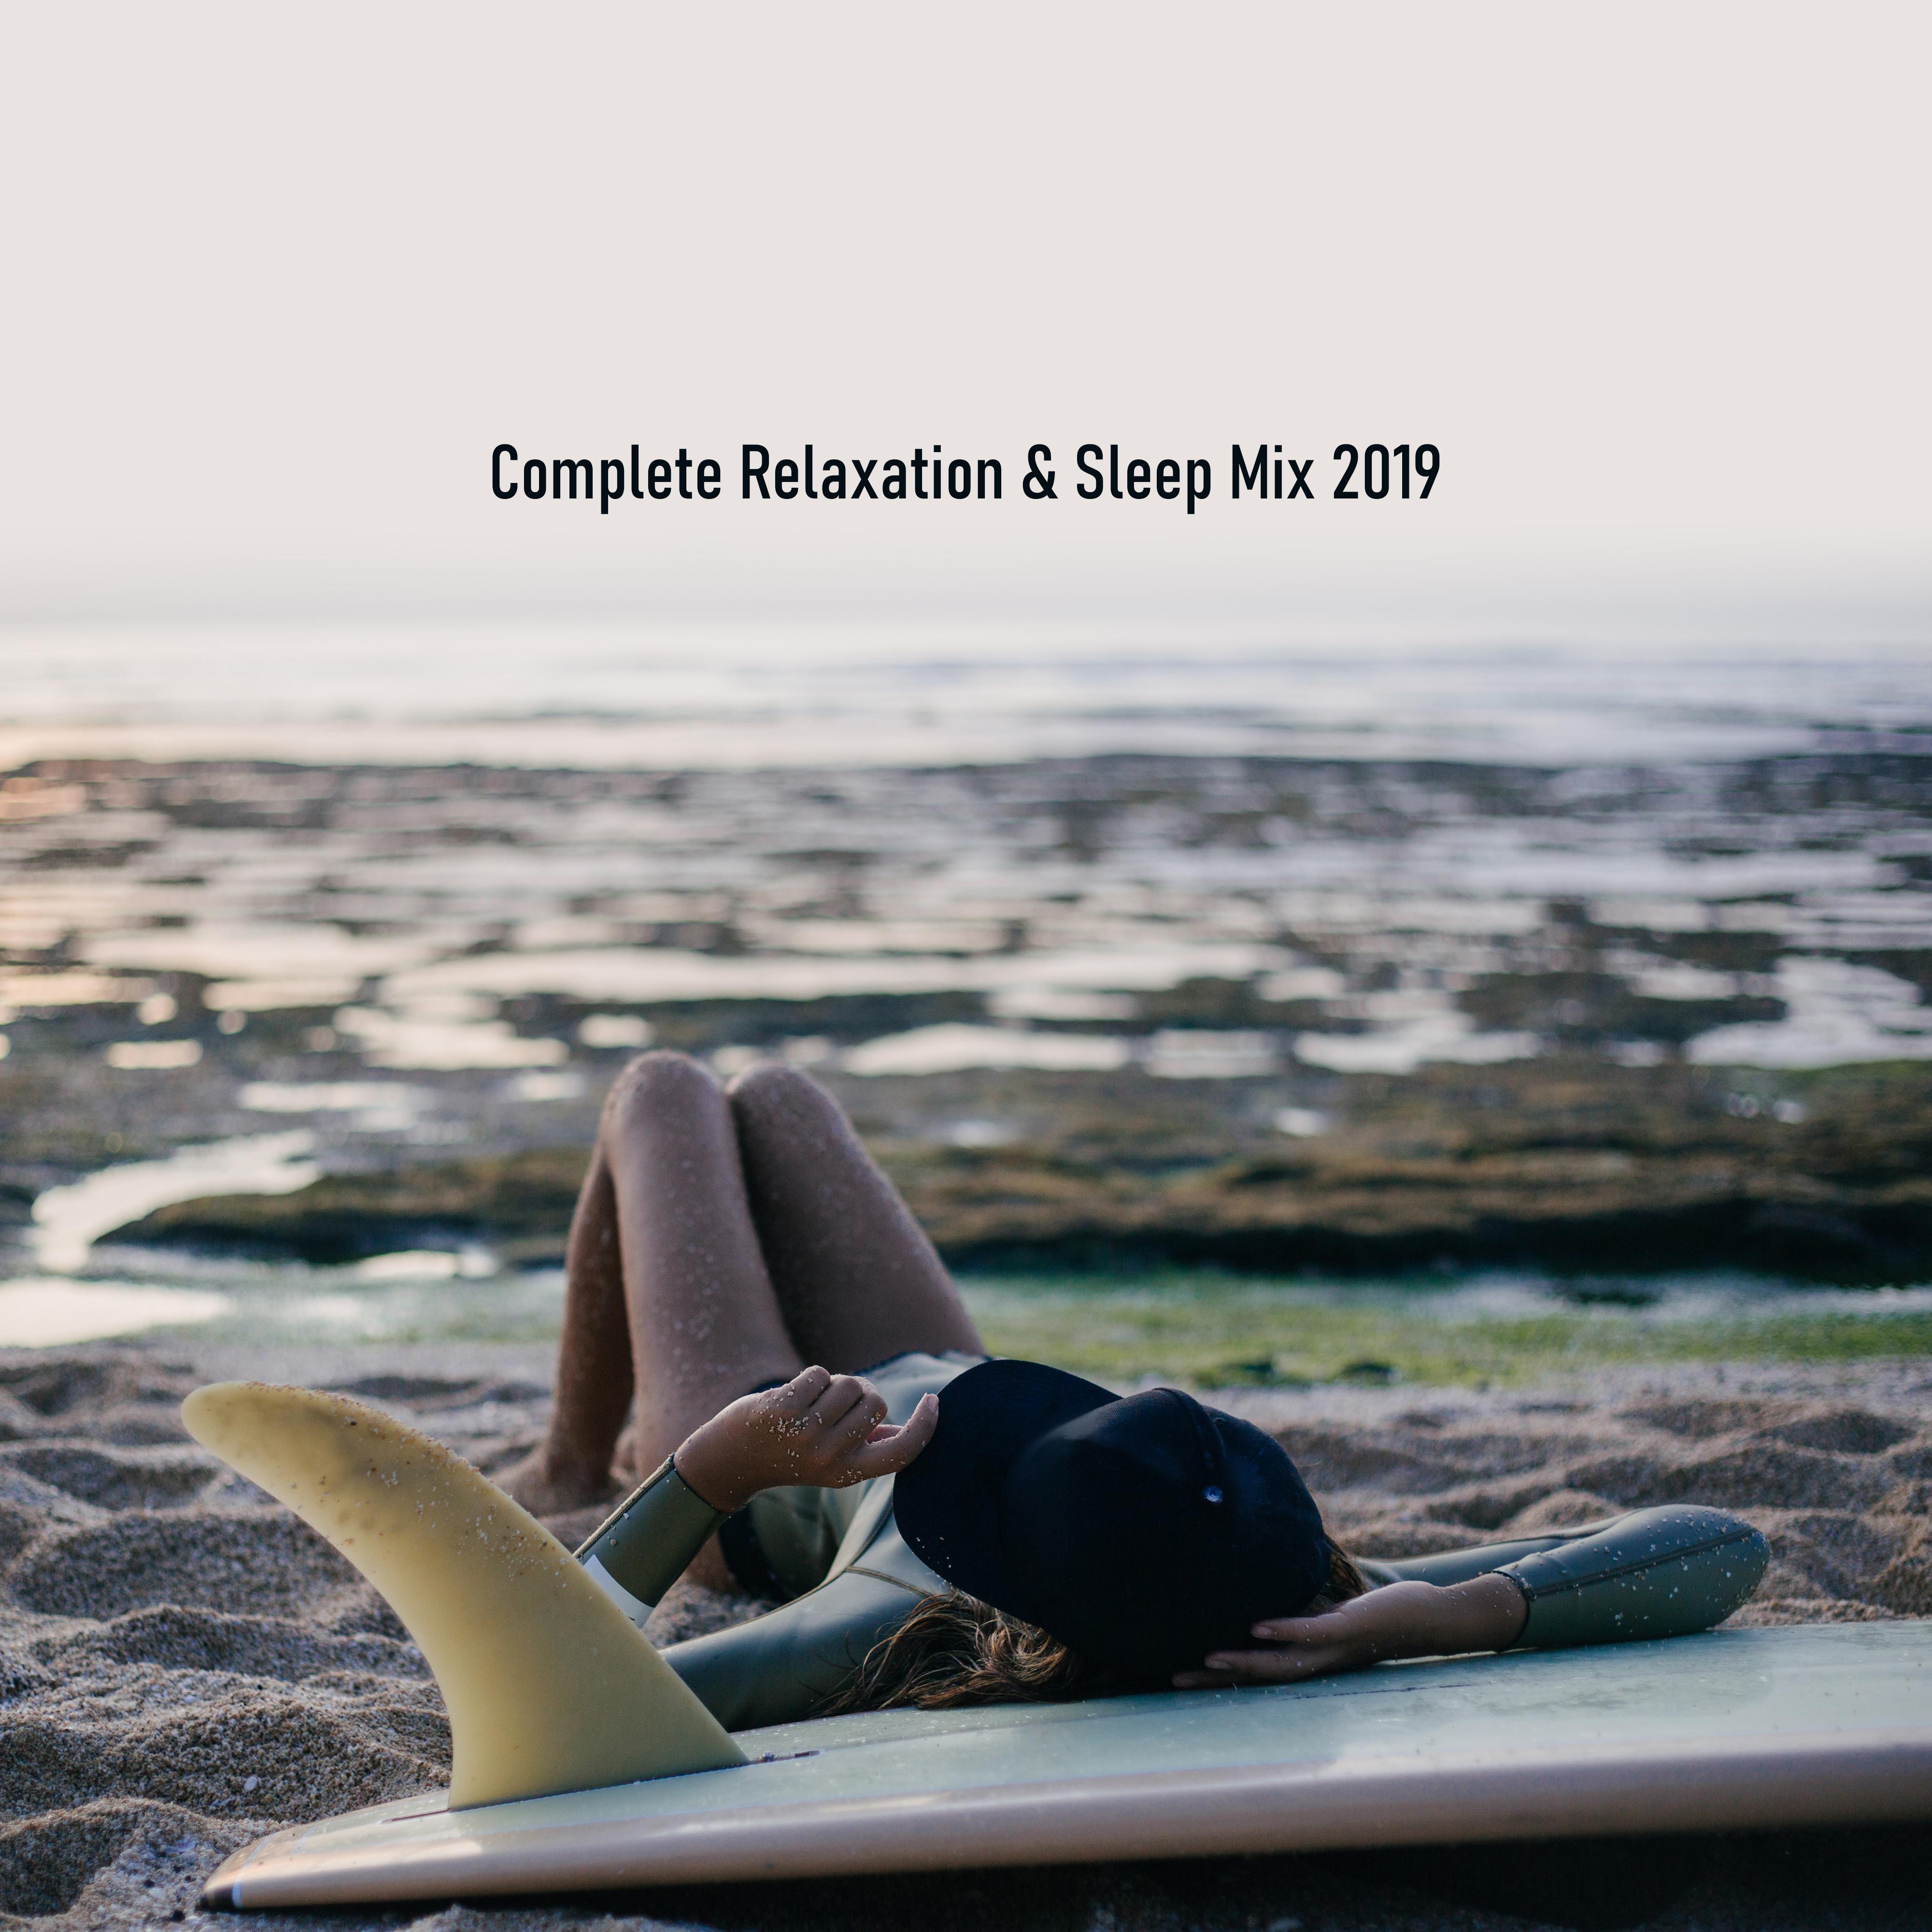 Complete Relaxation & Sleep Mix 2019: New Age Nature Music Collection, Soothing Piano Melodies with Sounds of Birds, Forest, Water & Many More